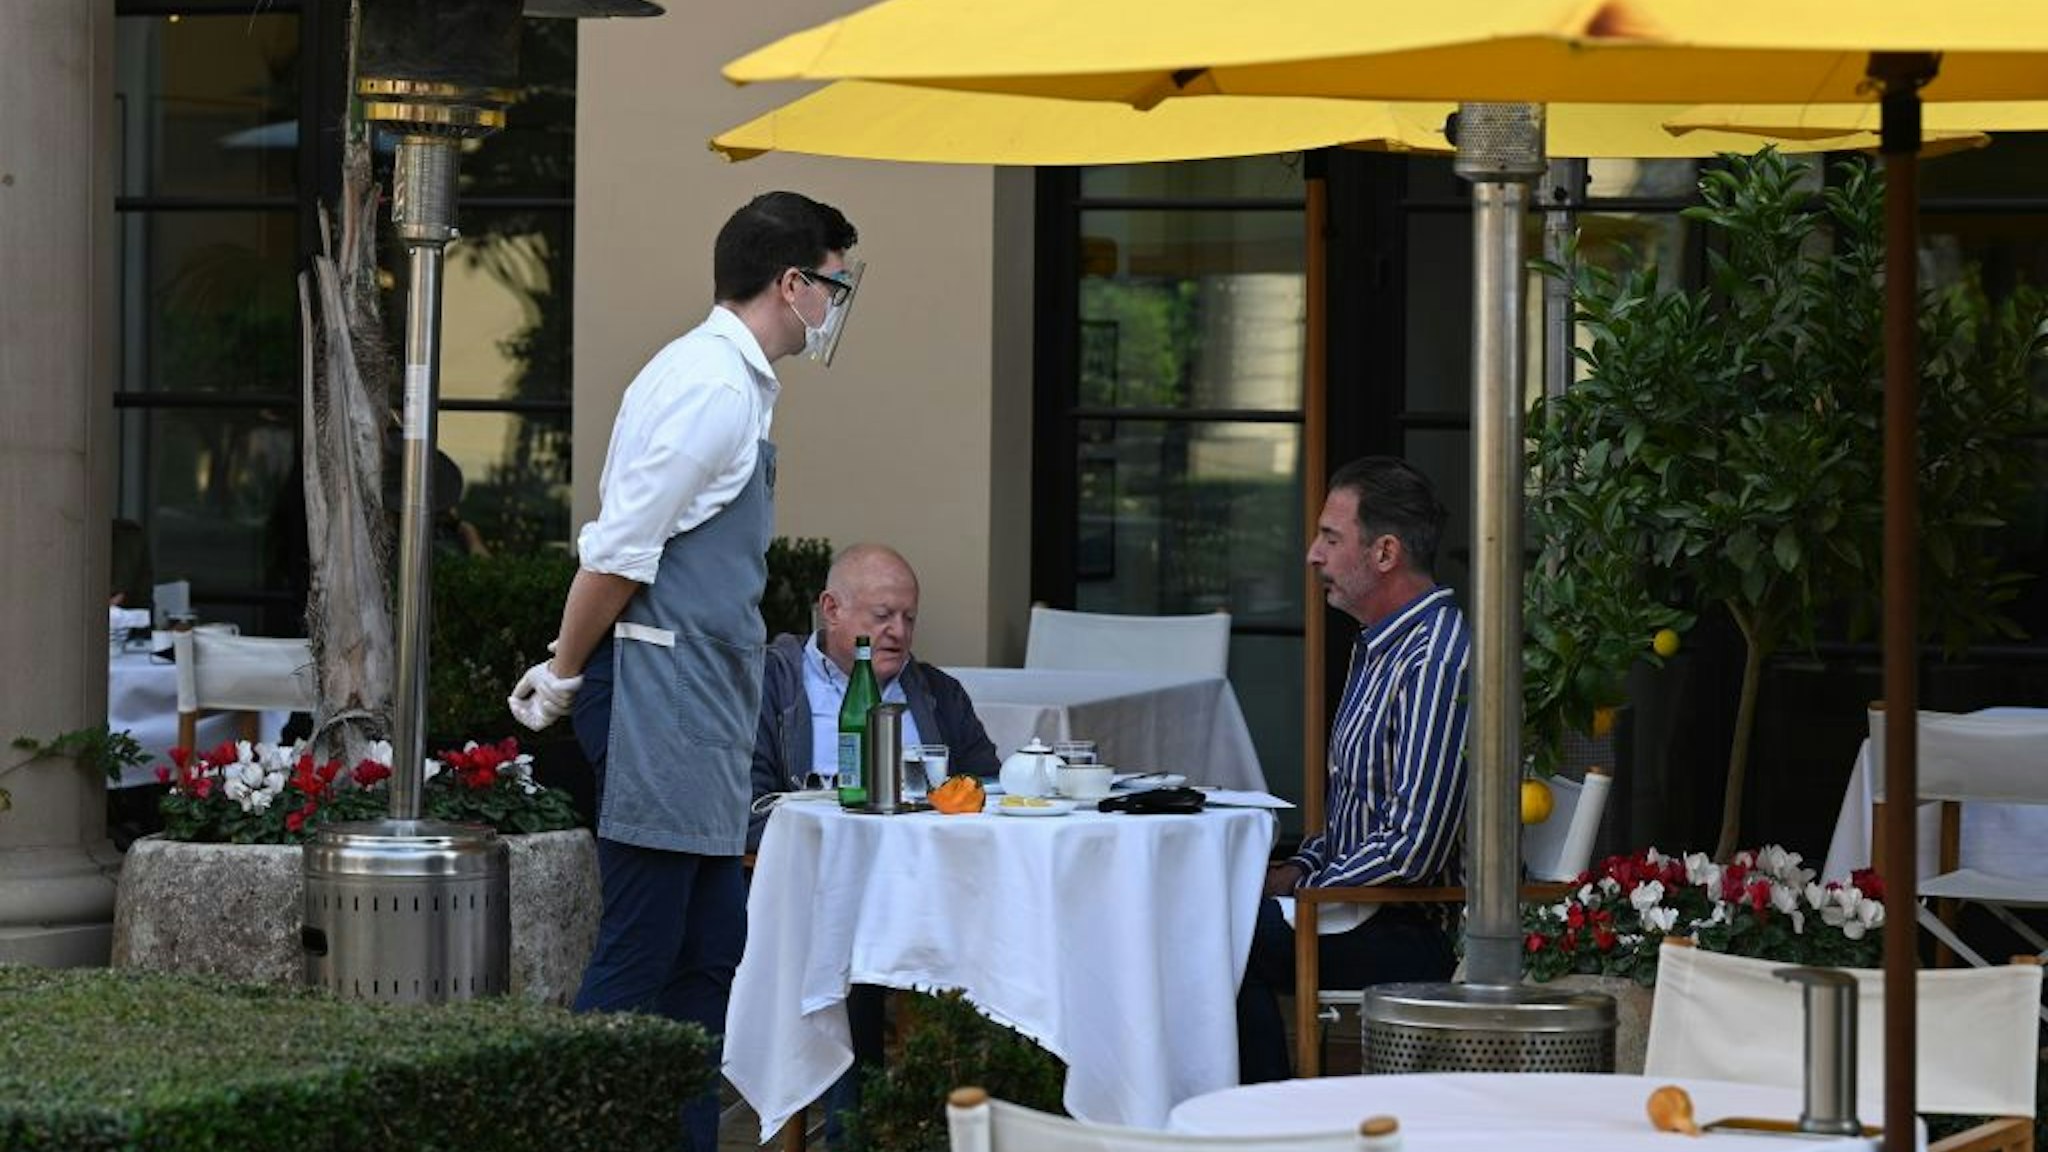 A server wearing a mask and face shield takes orders from customers at a restaurant in Beverly Hills, California, November 23, 2020. - Los Angeles County pubic health officials have issued an order to suspend all restaurant dining including outdoor dining for three weeks, starting November 24 at 10pm amid a surge of new coronavirus cases. There is major pushback against the order which some estimates will result in the loss of 700,000 jobs and lead to the closure of restaurants. (Photo by Robyn Beck / AFP) (Photo by ROBYN BECK/AFP via Getty Images)